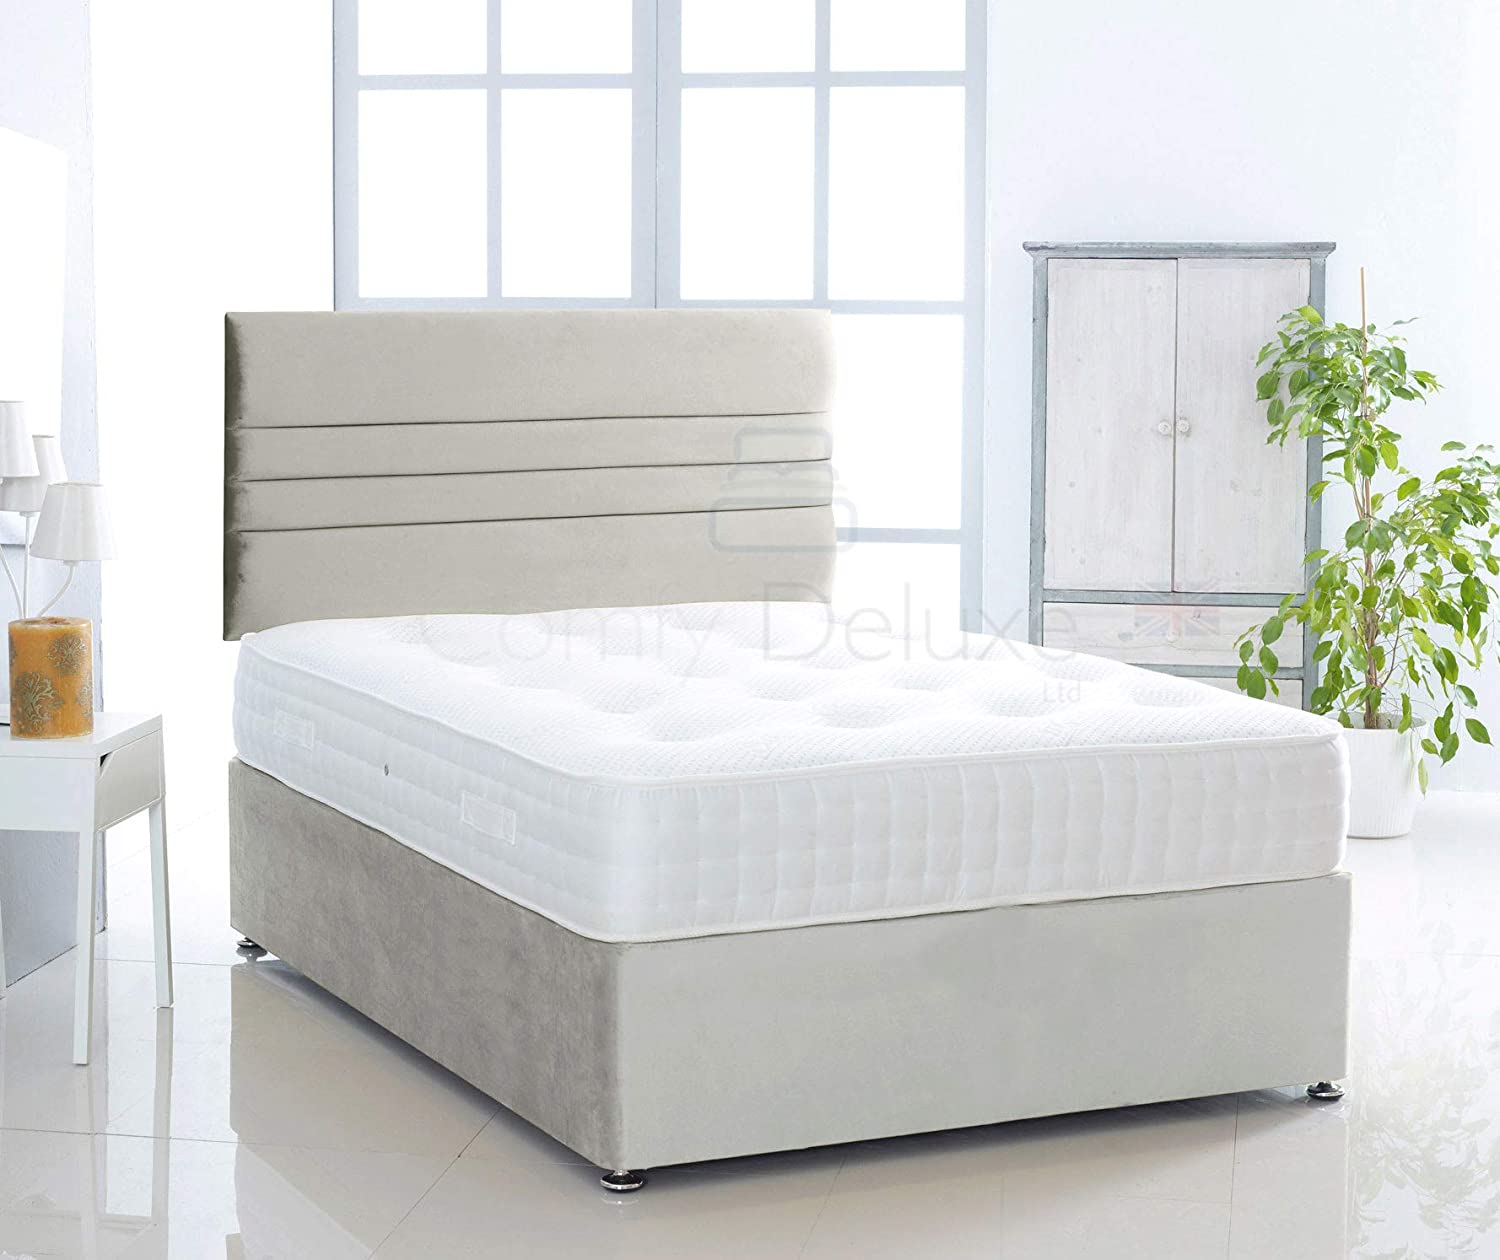 Silver-Verona-Plush-Pocket-Divan-Bed-Set-Lined-Headboard-Storage-Drawers-Faux-Leather-Chenille-Soft-Velvet-Lined-Headboard-Pocket-Mattress-Soft-Firm-Medium-Firm-Glides